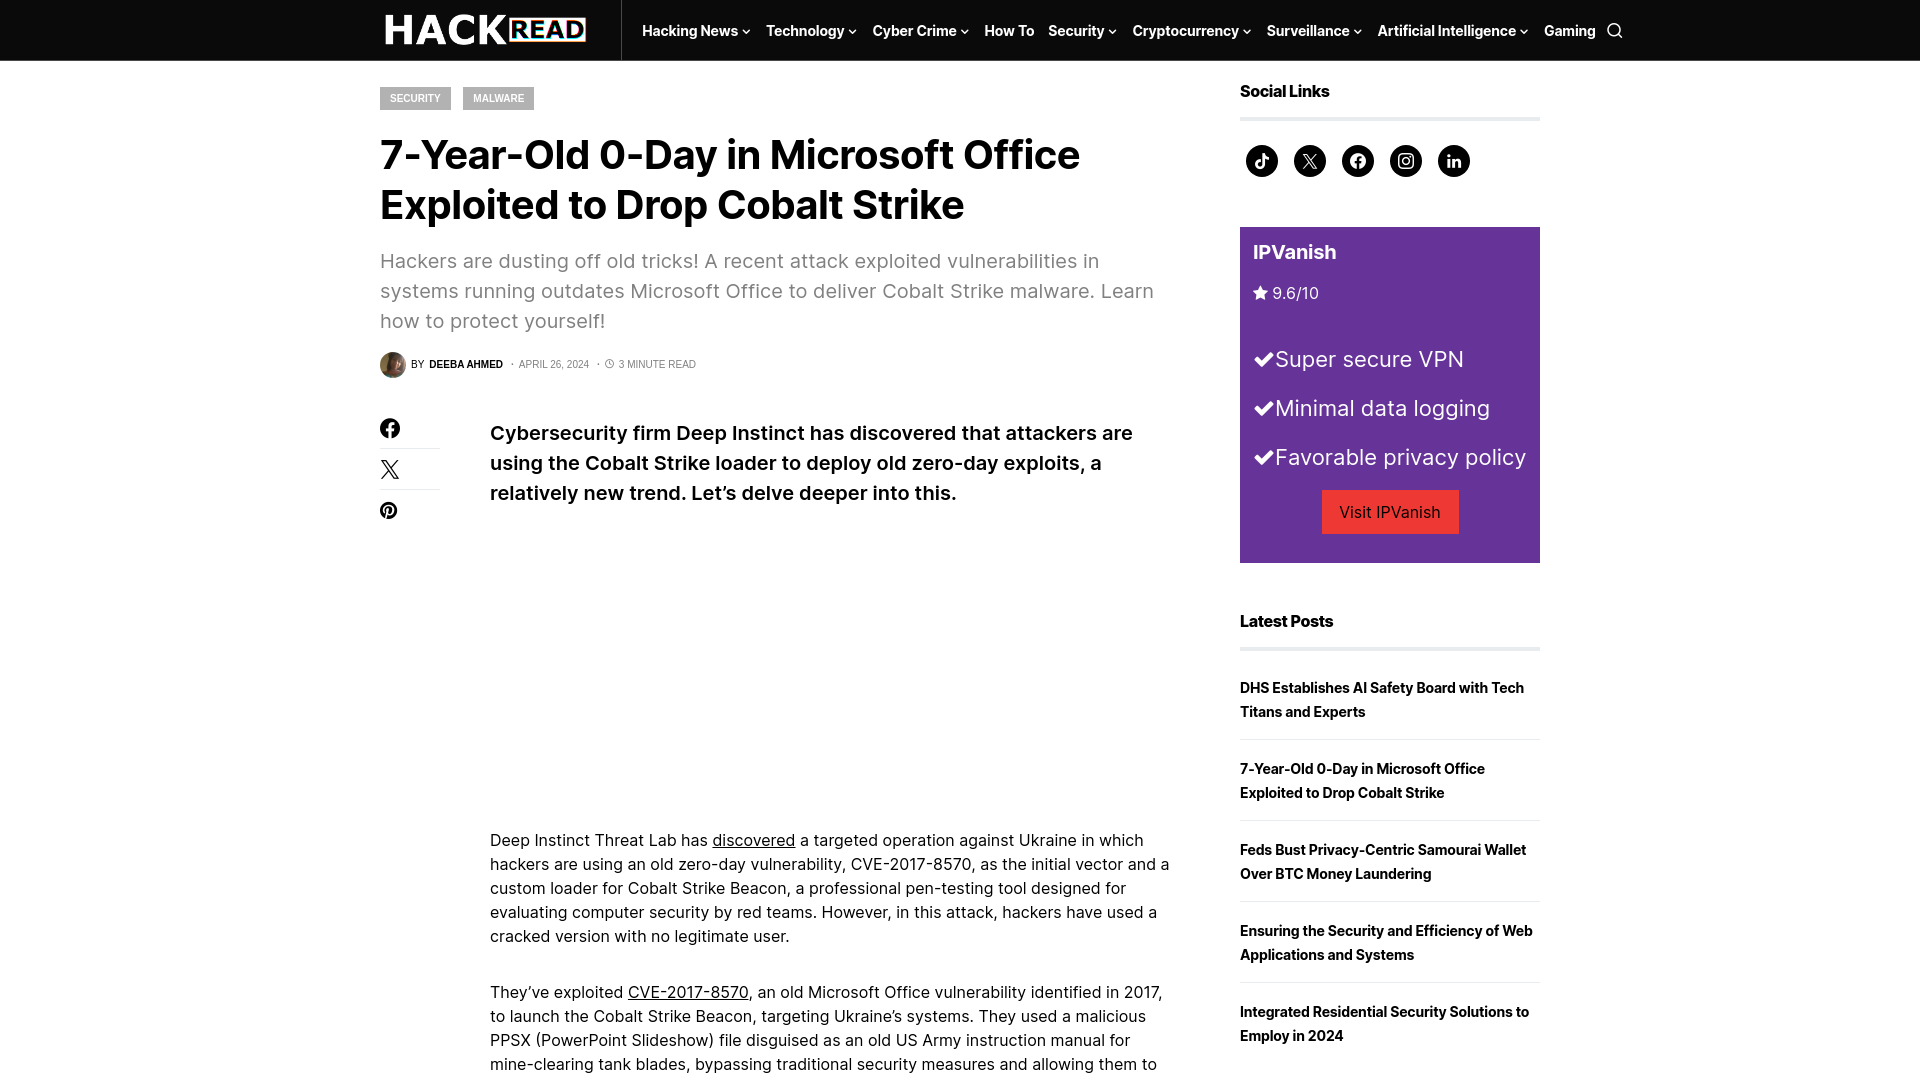 7-Year-Old 0-Day in Microsoft Office Exploited to Drop Cobalt Strike